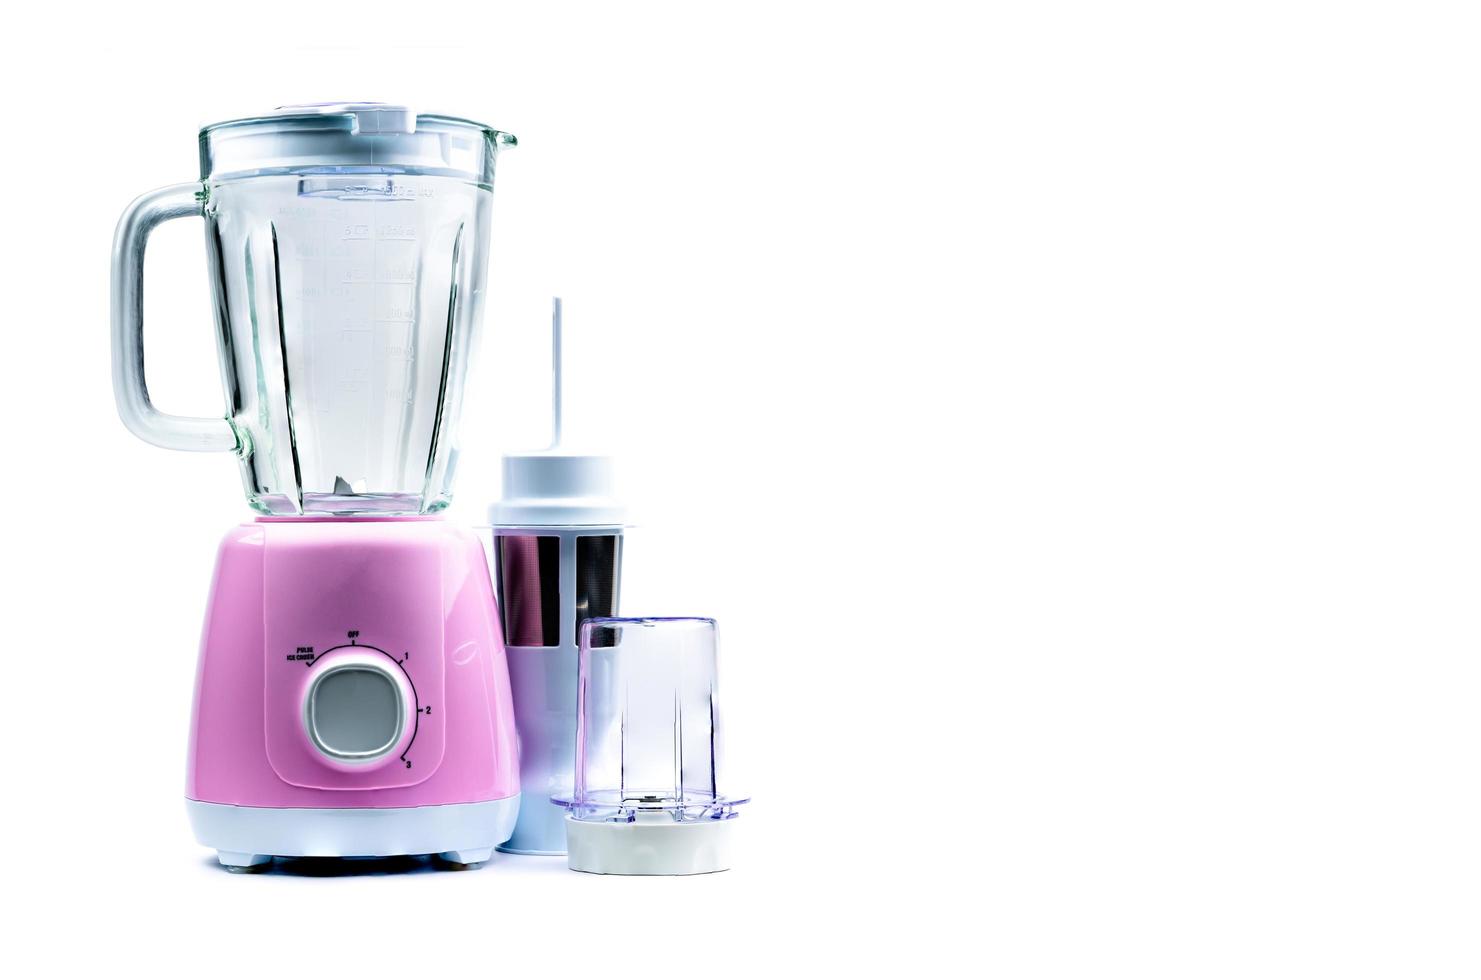 Empty pastel purple electric blender with filter, toughened glass jug, dry grinder and speed selector isolated on white background. Blender and grinder machine for healthy lifestyle. Kitchen appliance photo